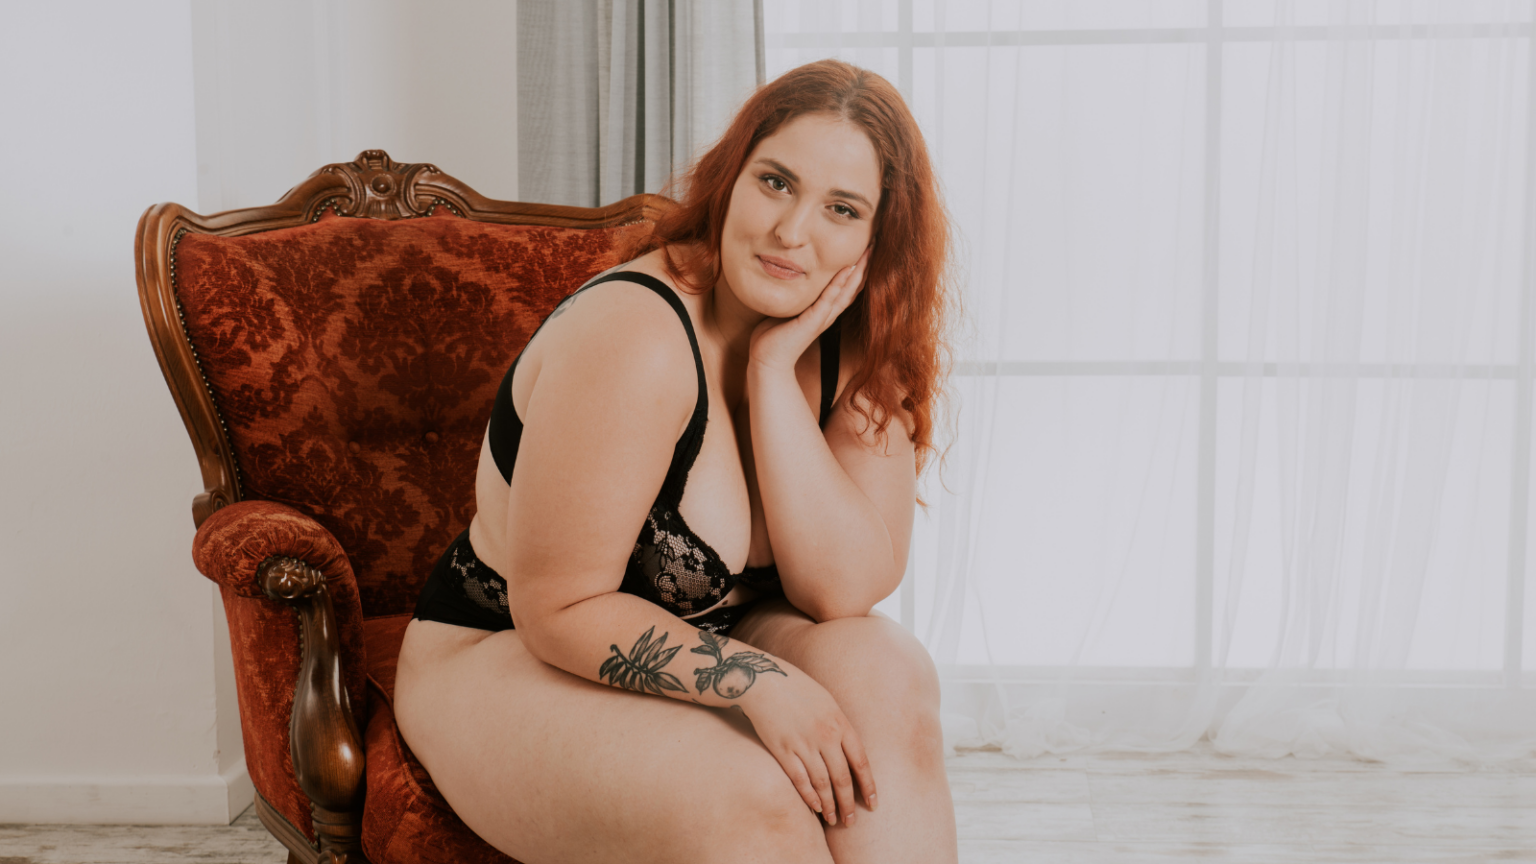 Photo of a plus size feminine person with light skin and red hair and tattoos on their arm sitting on a velvet chair and smiling softly